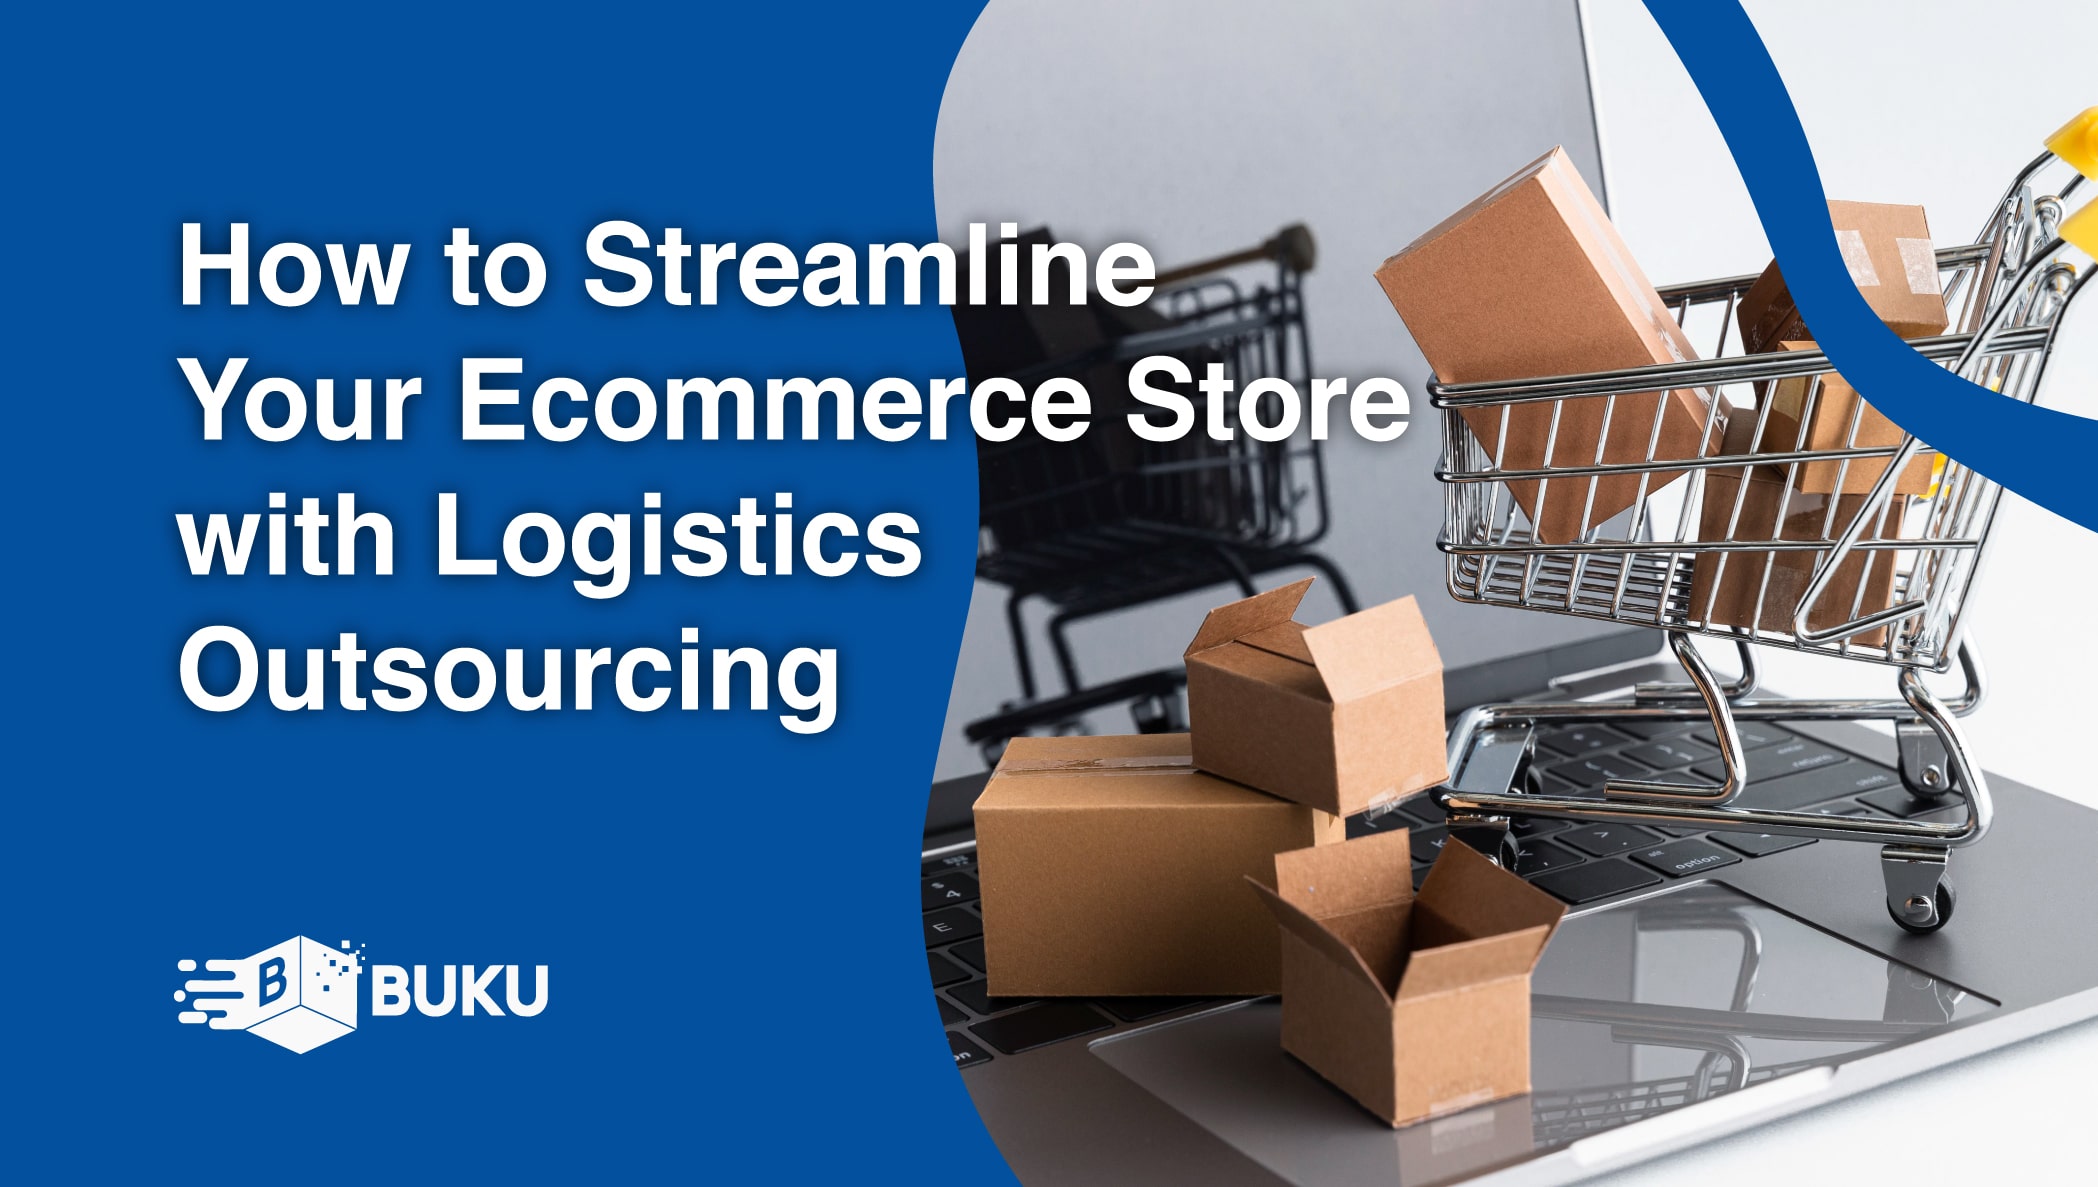 How to Streamline Your Ecommerce Store with Logistics Outsourcing